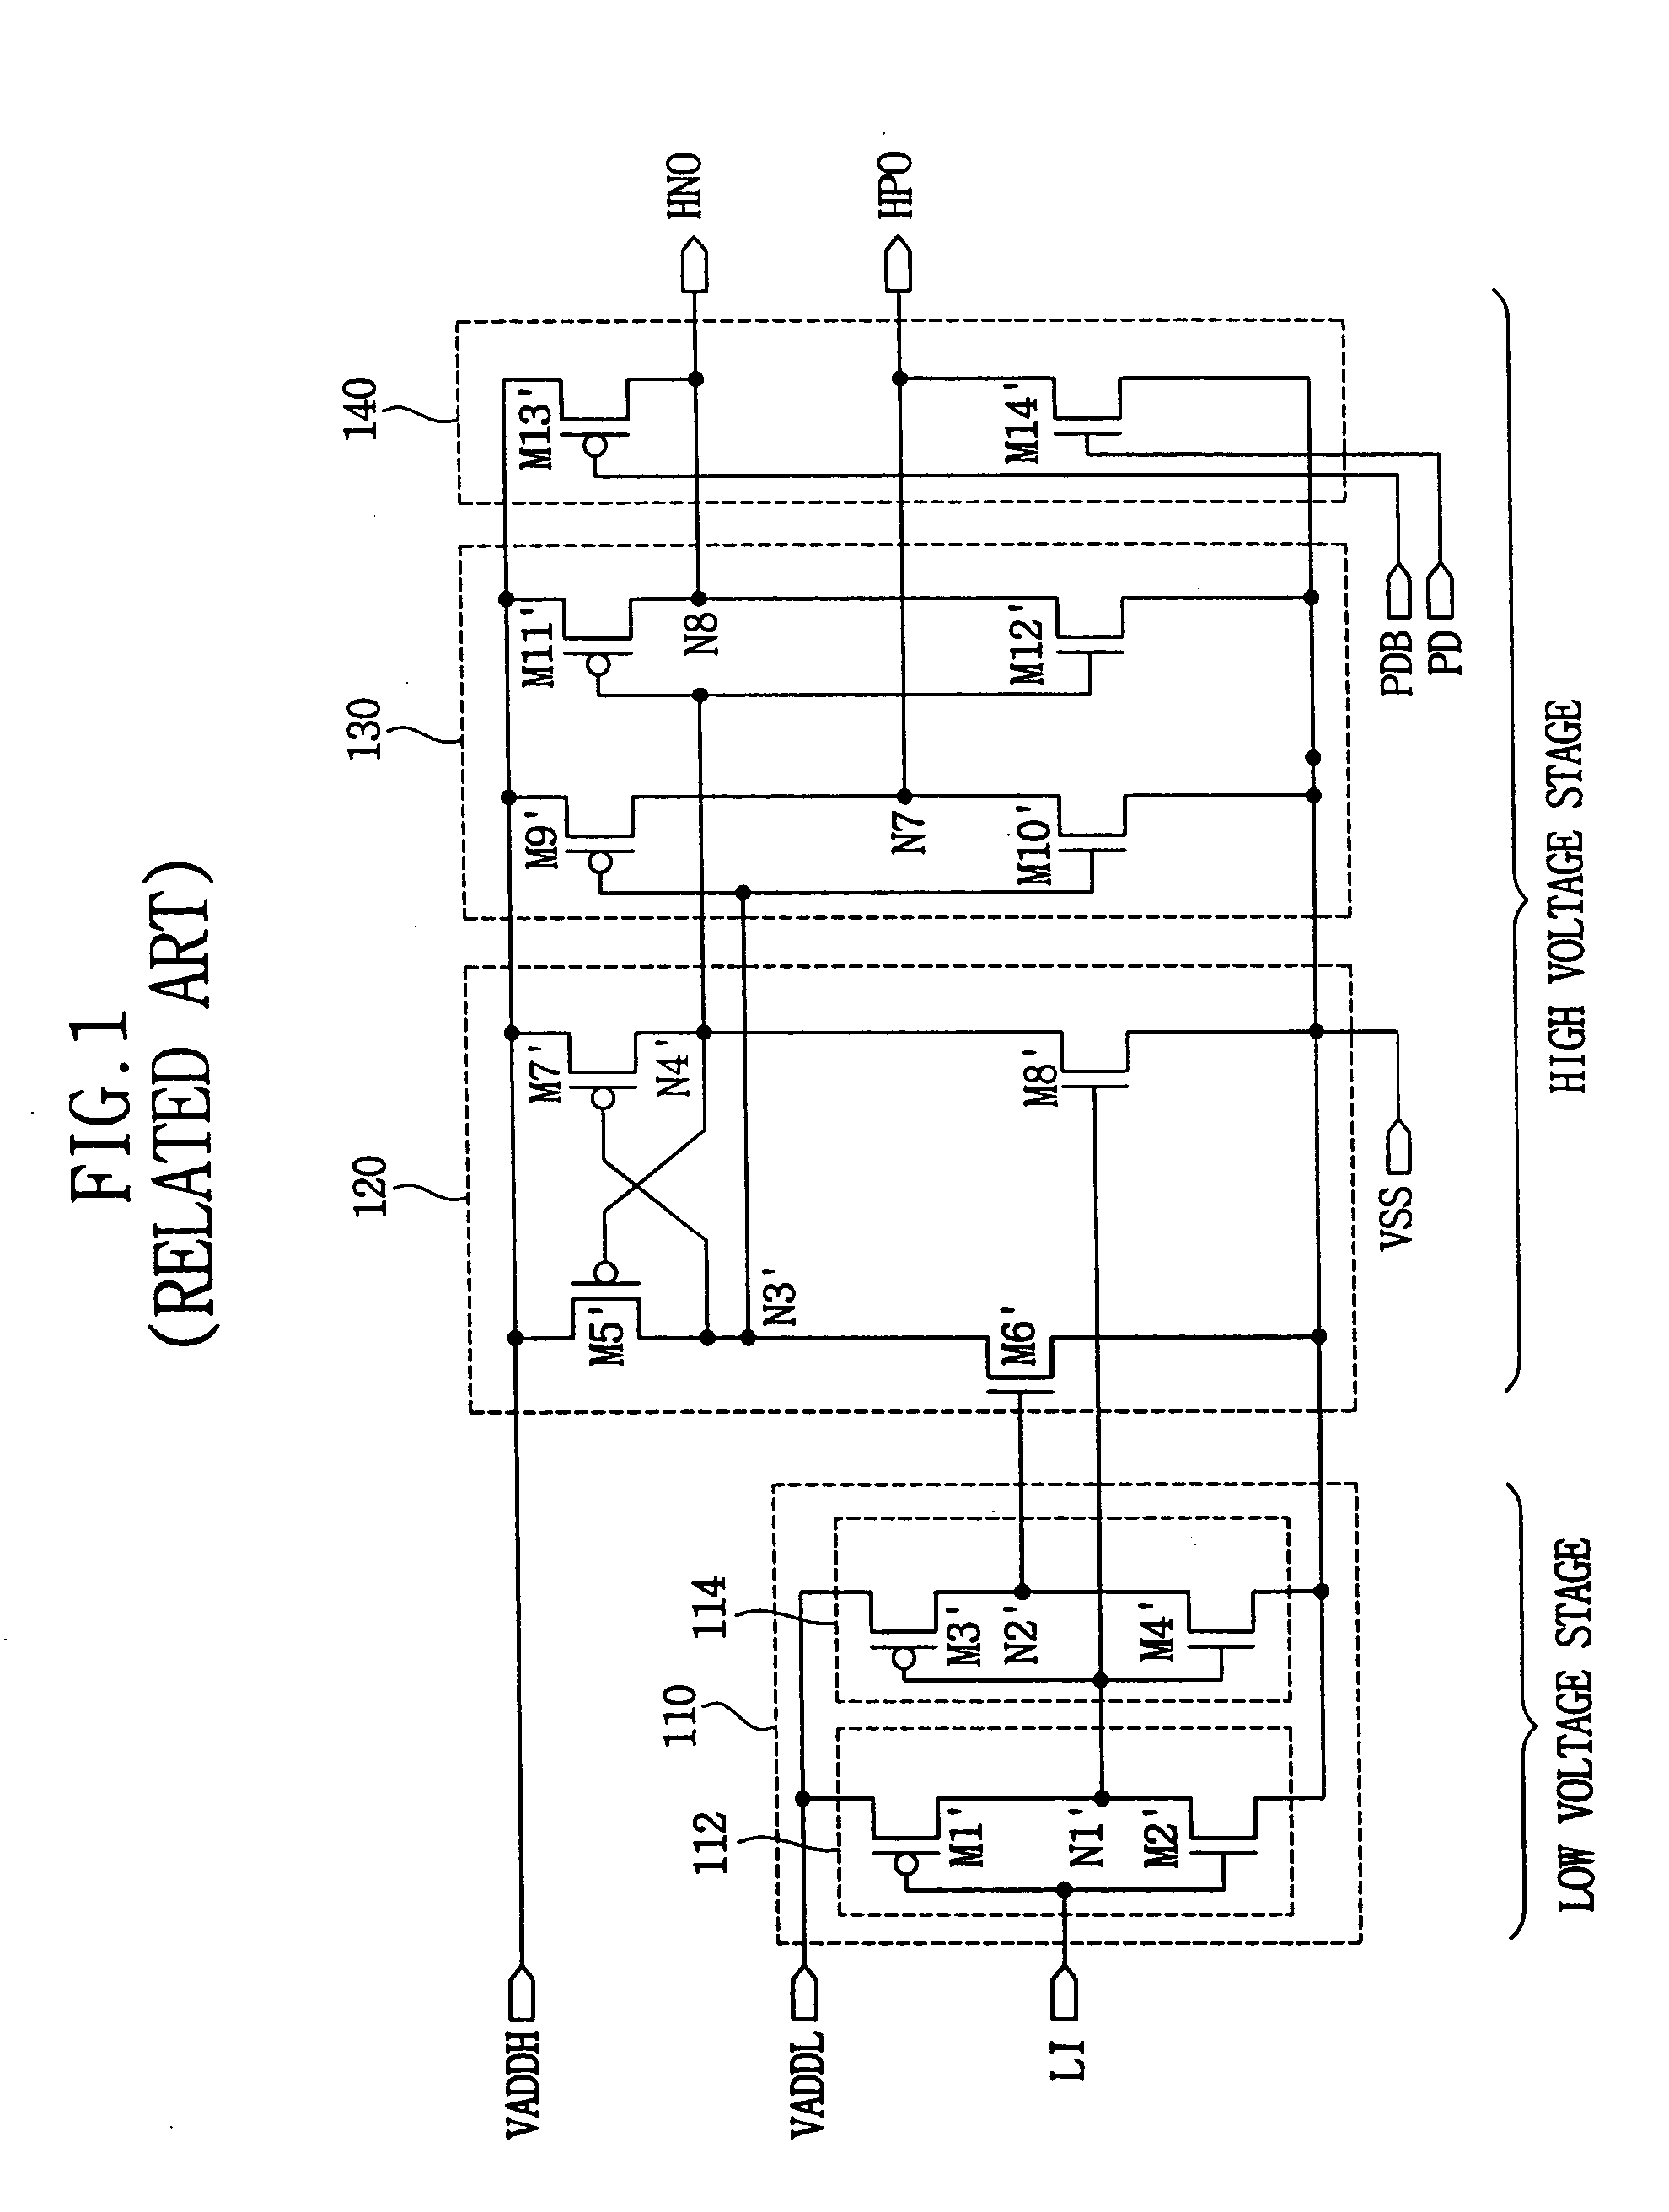 Level shifter for detecting grounded power-supply and level shifting method